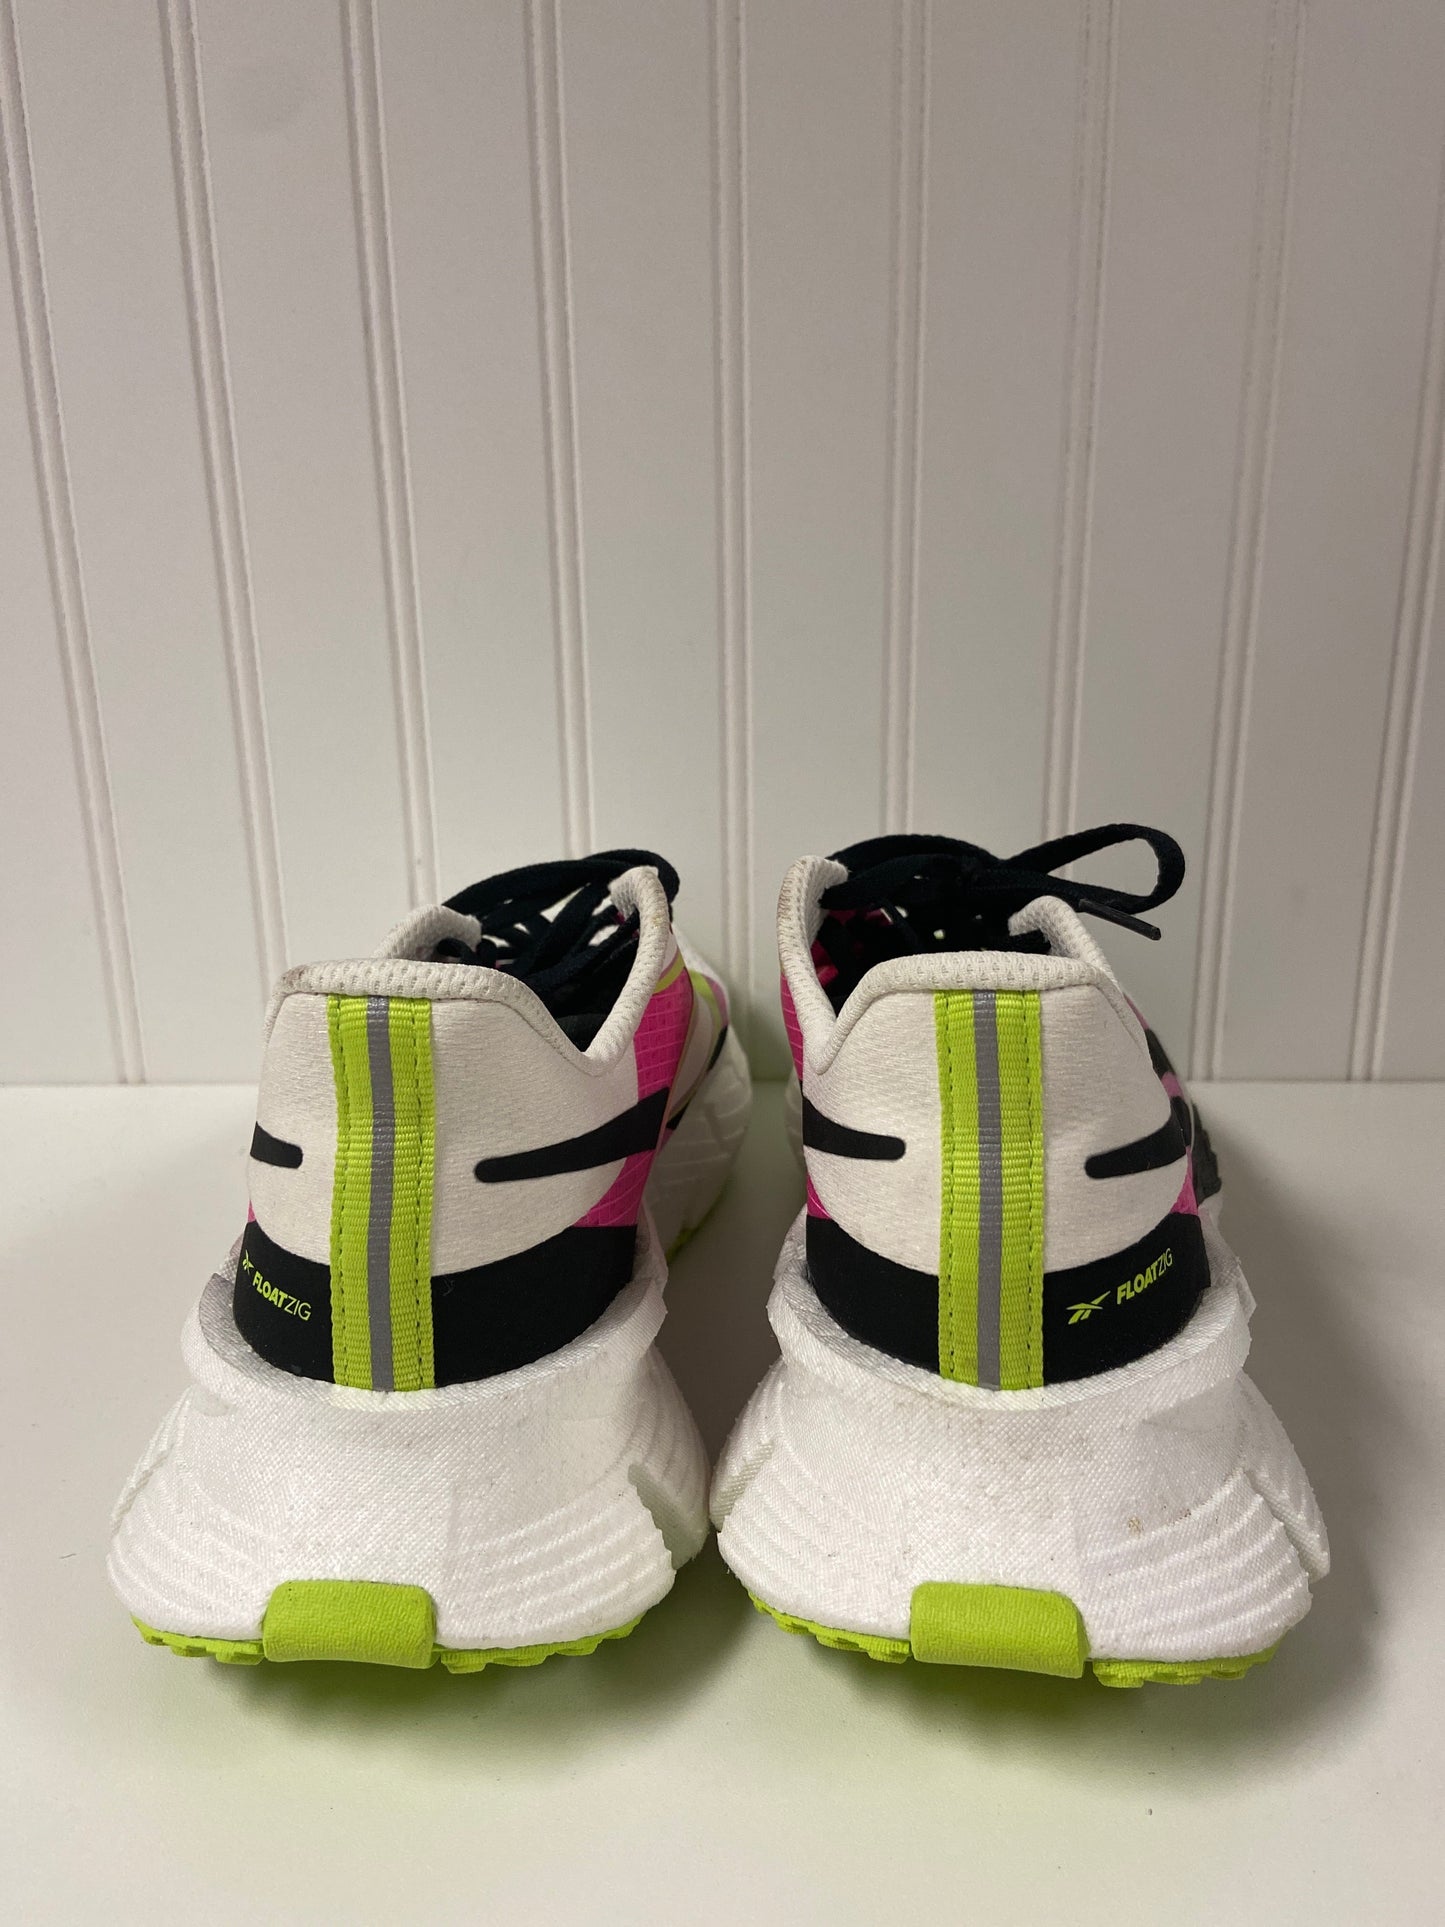 Green & Pink Shoes Athletic Reebok, Size 8.5